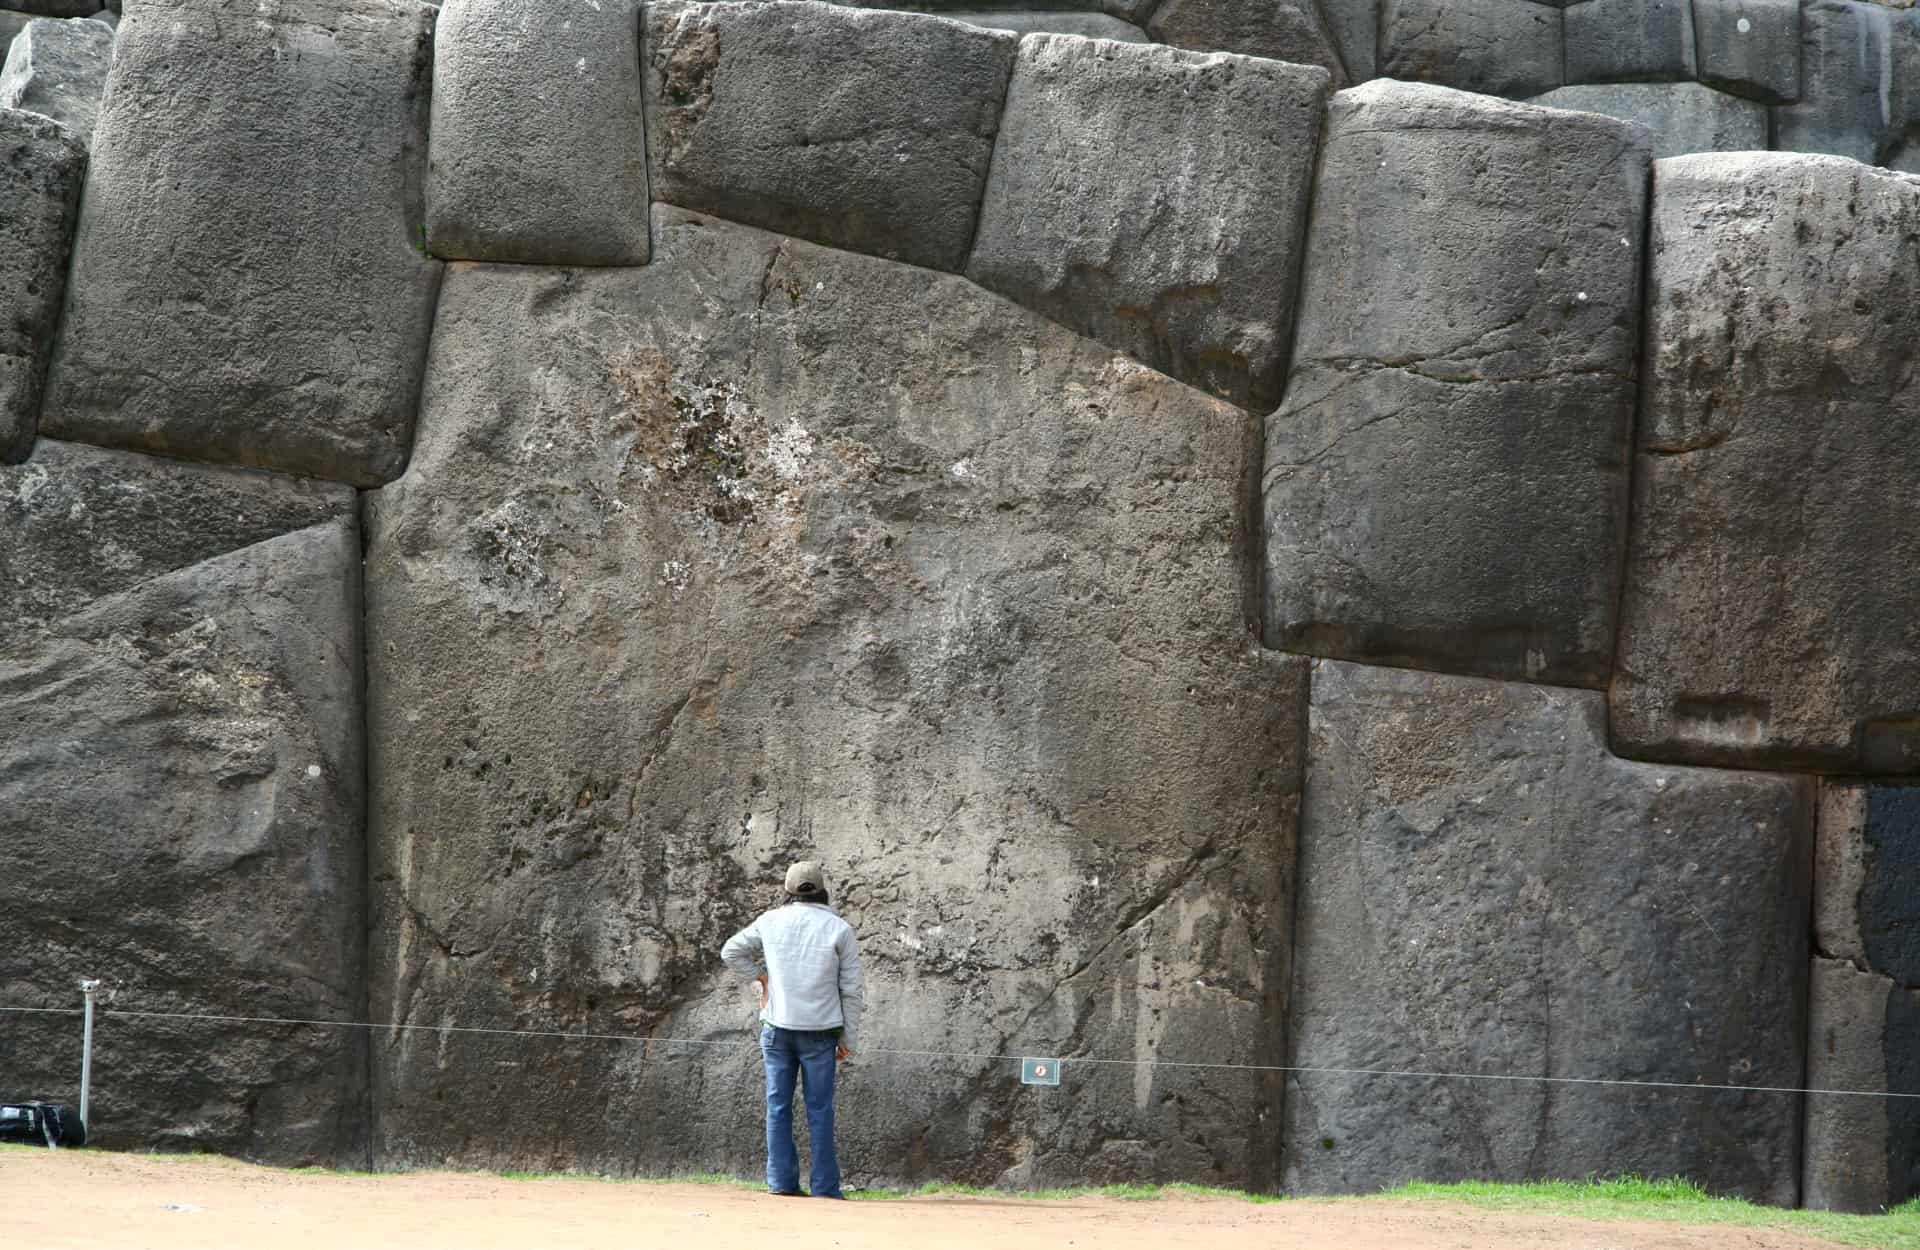 Sacsayhuaman's structure makes one to wonder how this feat was possible.